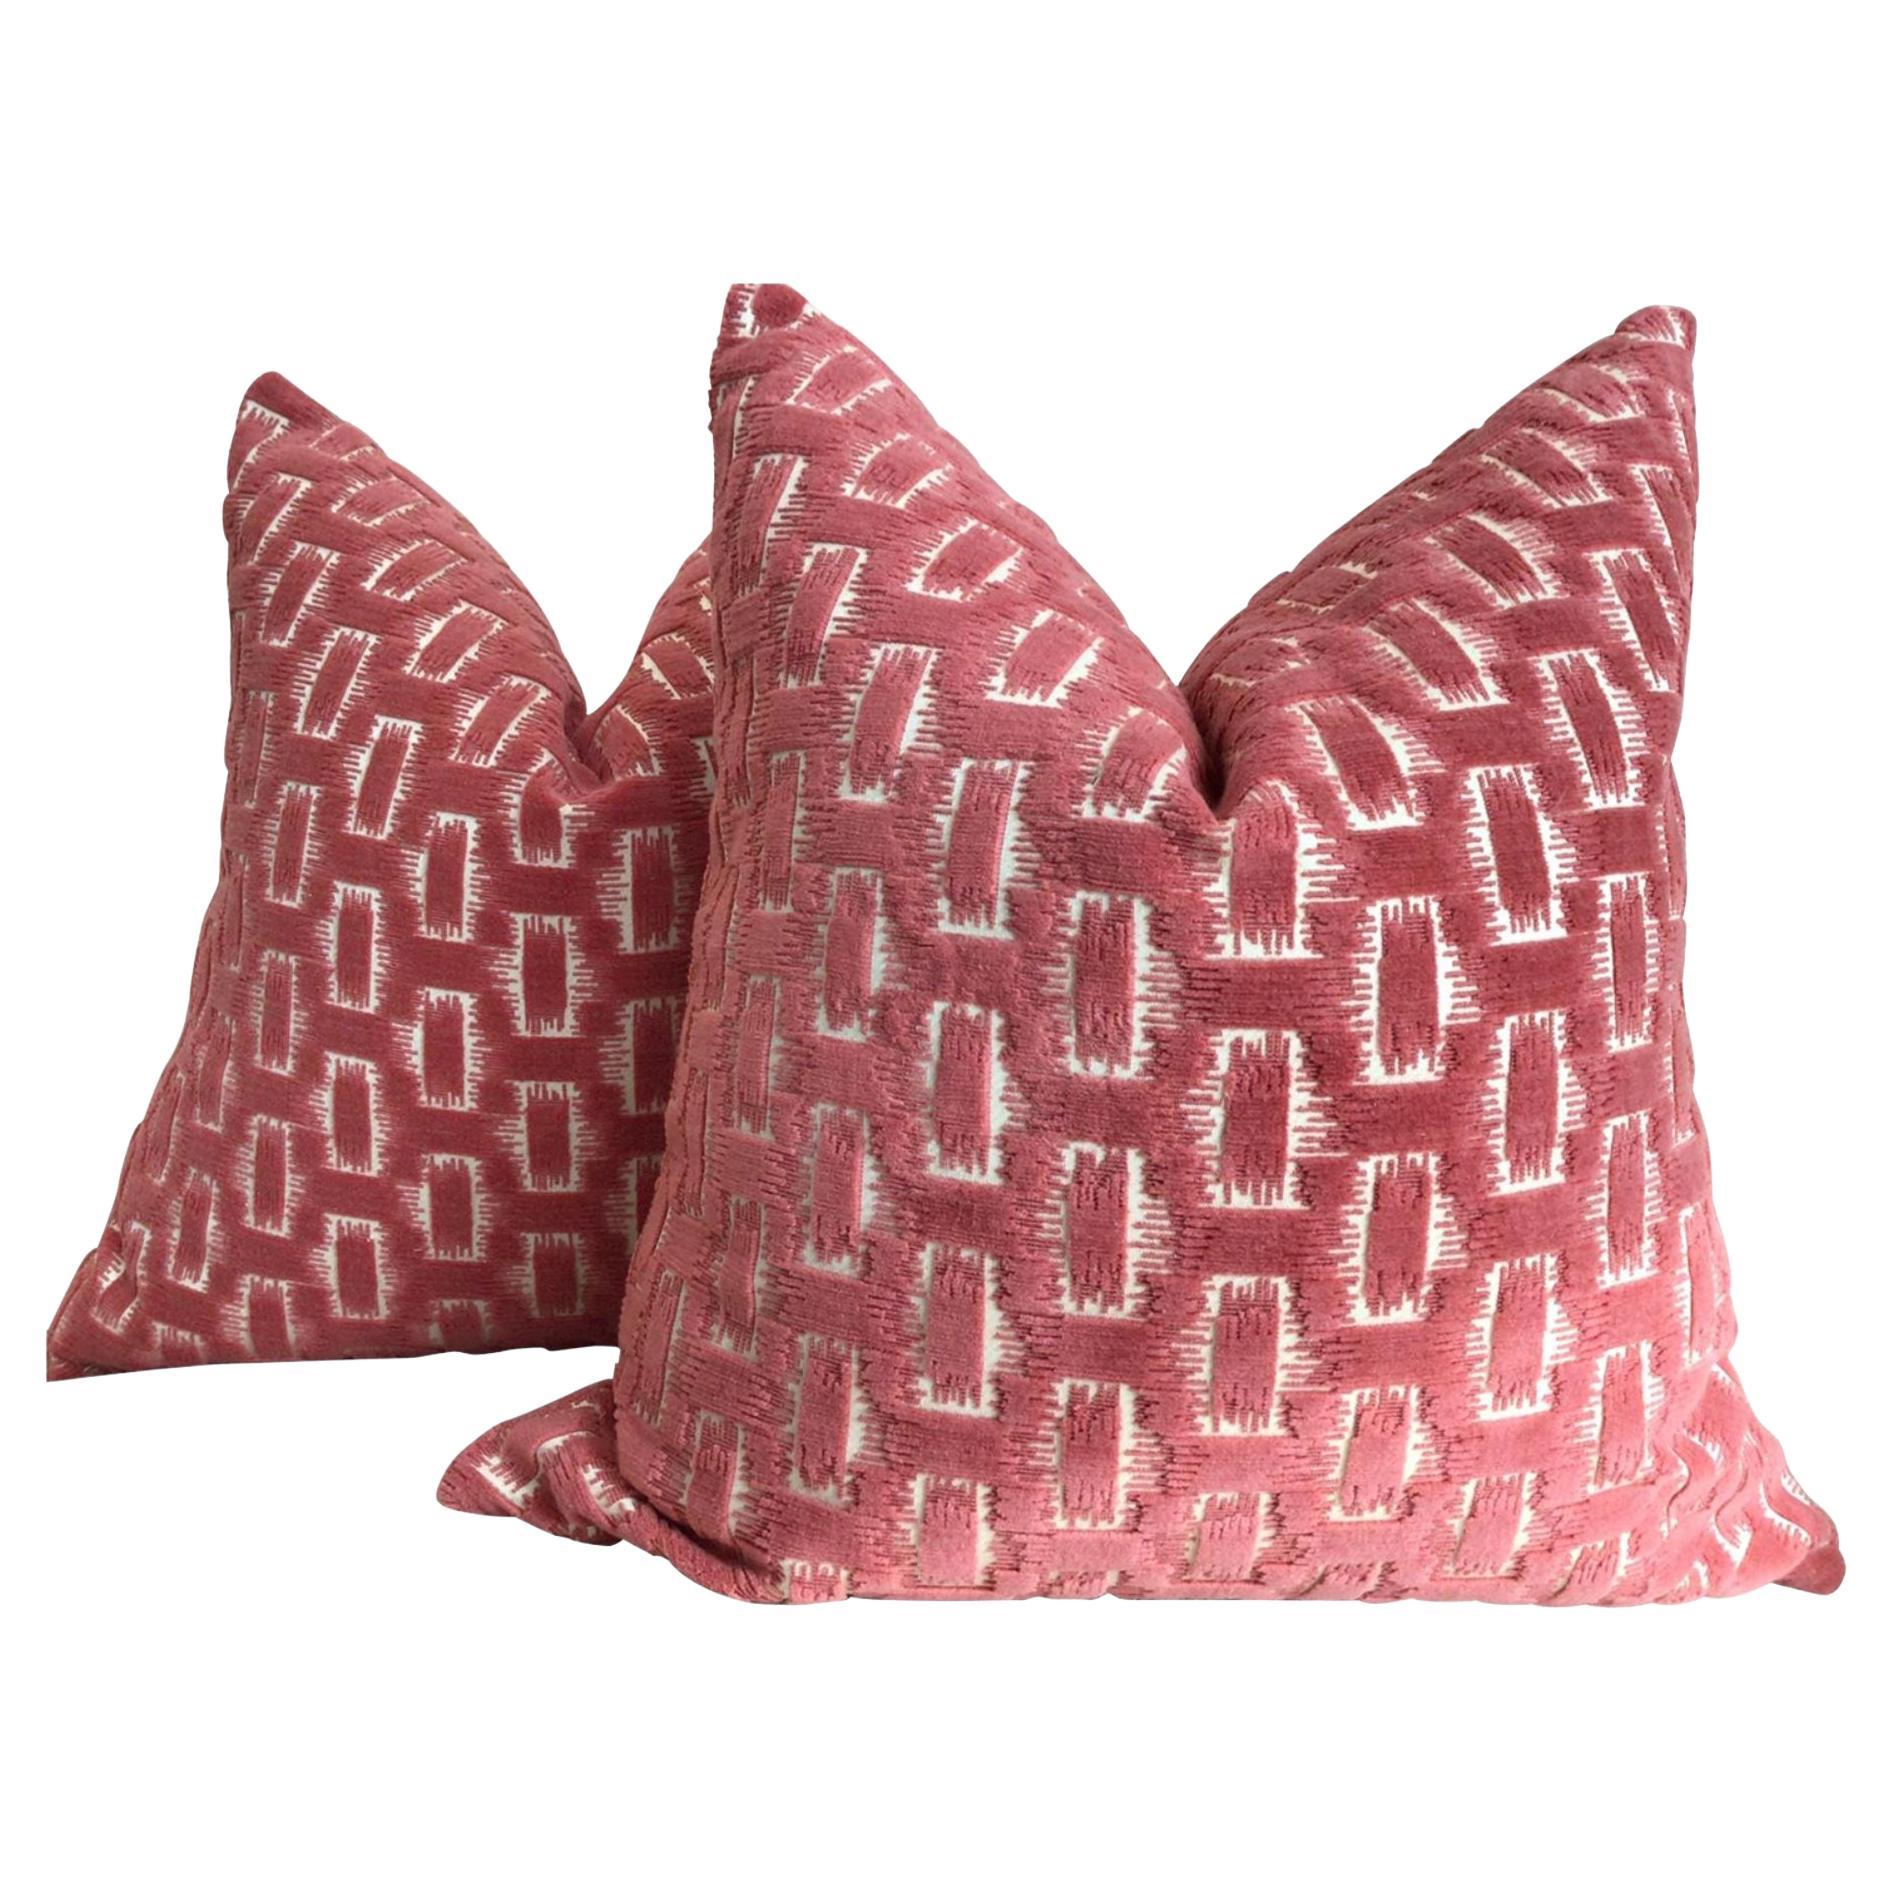 Brunschwig and Fils "Chambord" Velvet in Rose Pillows- a Pair For Sale